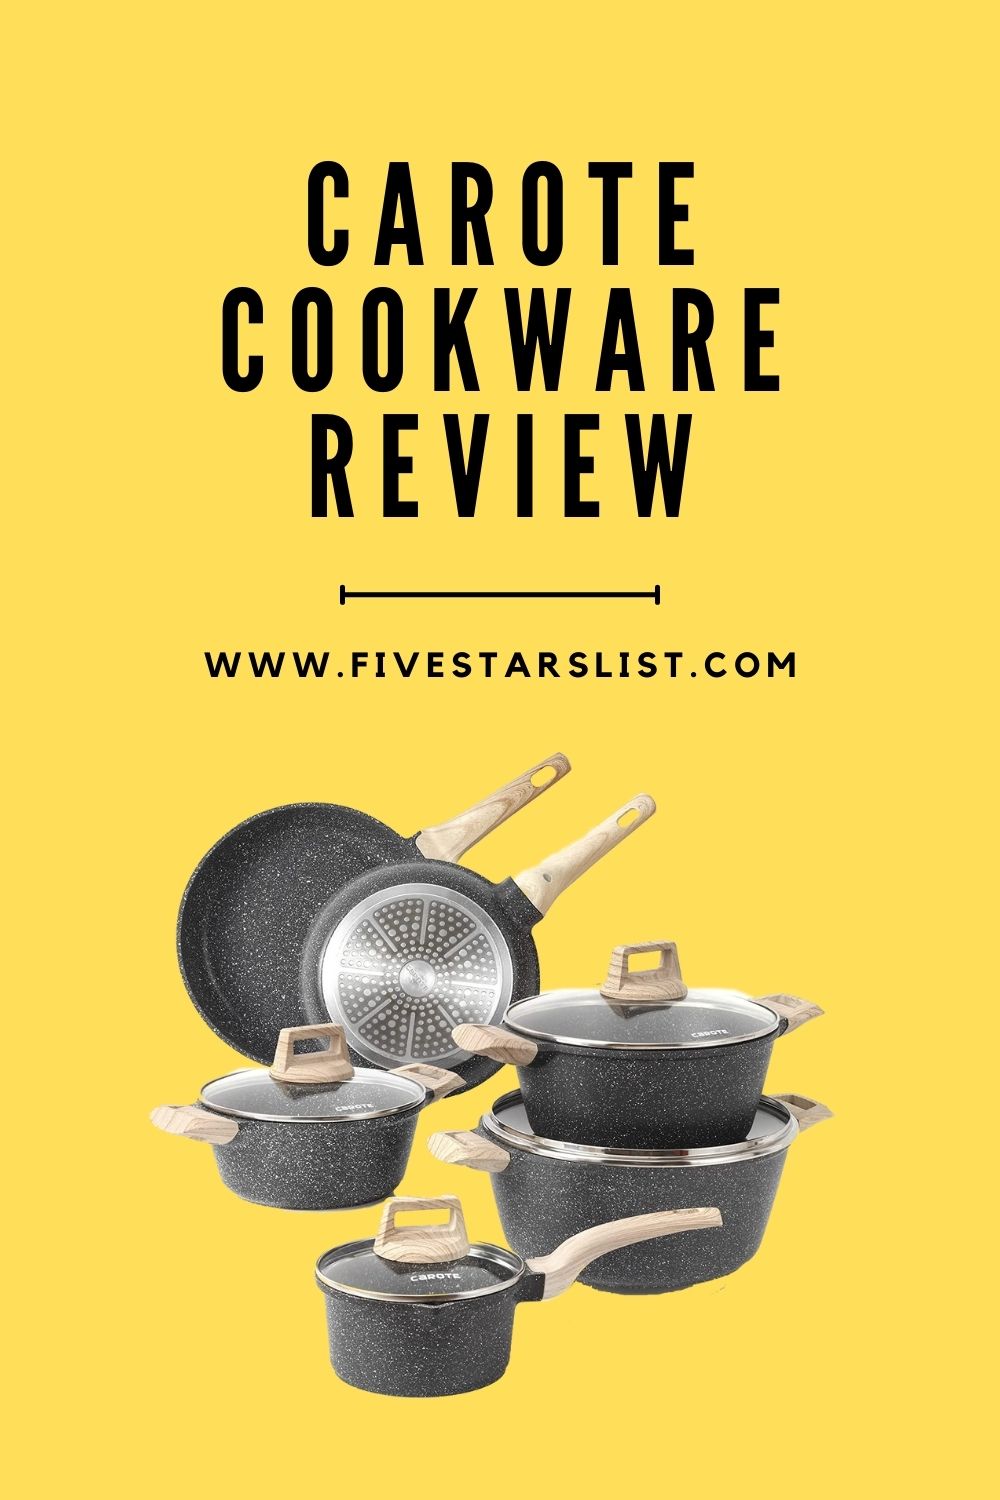 Carote Cookware Review